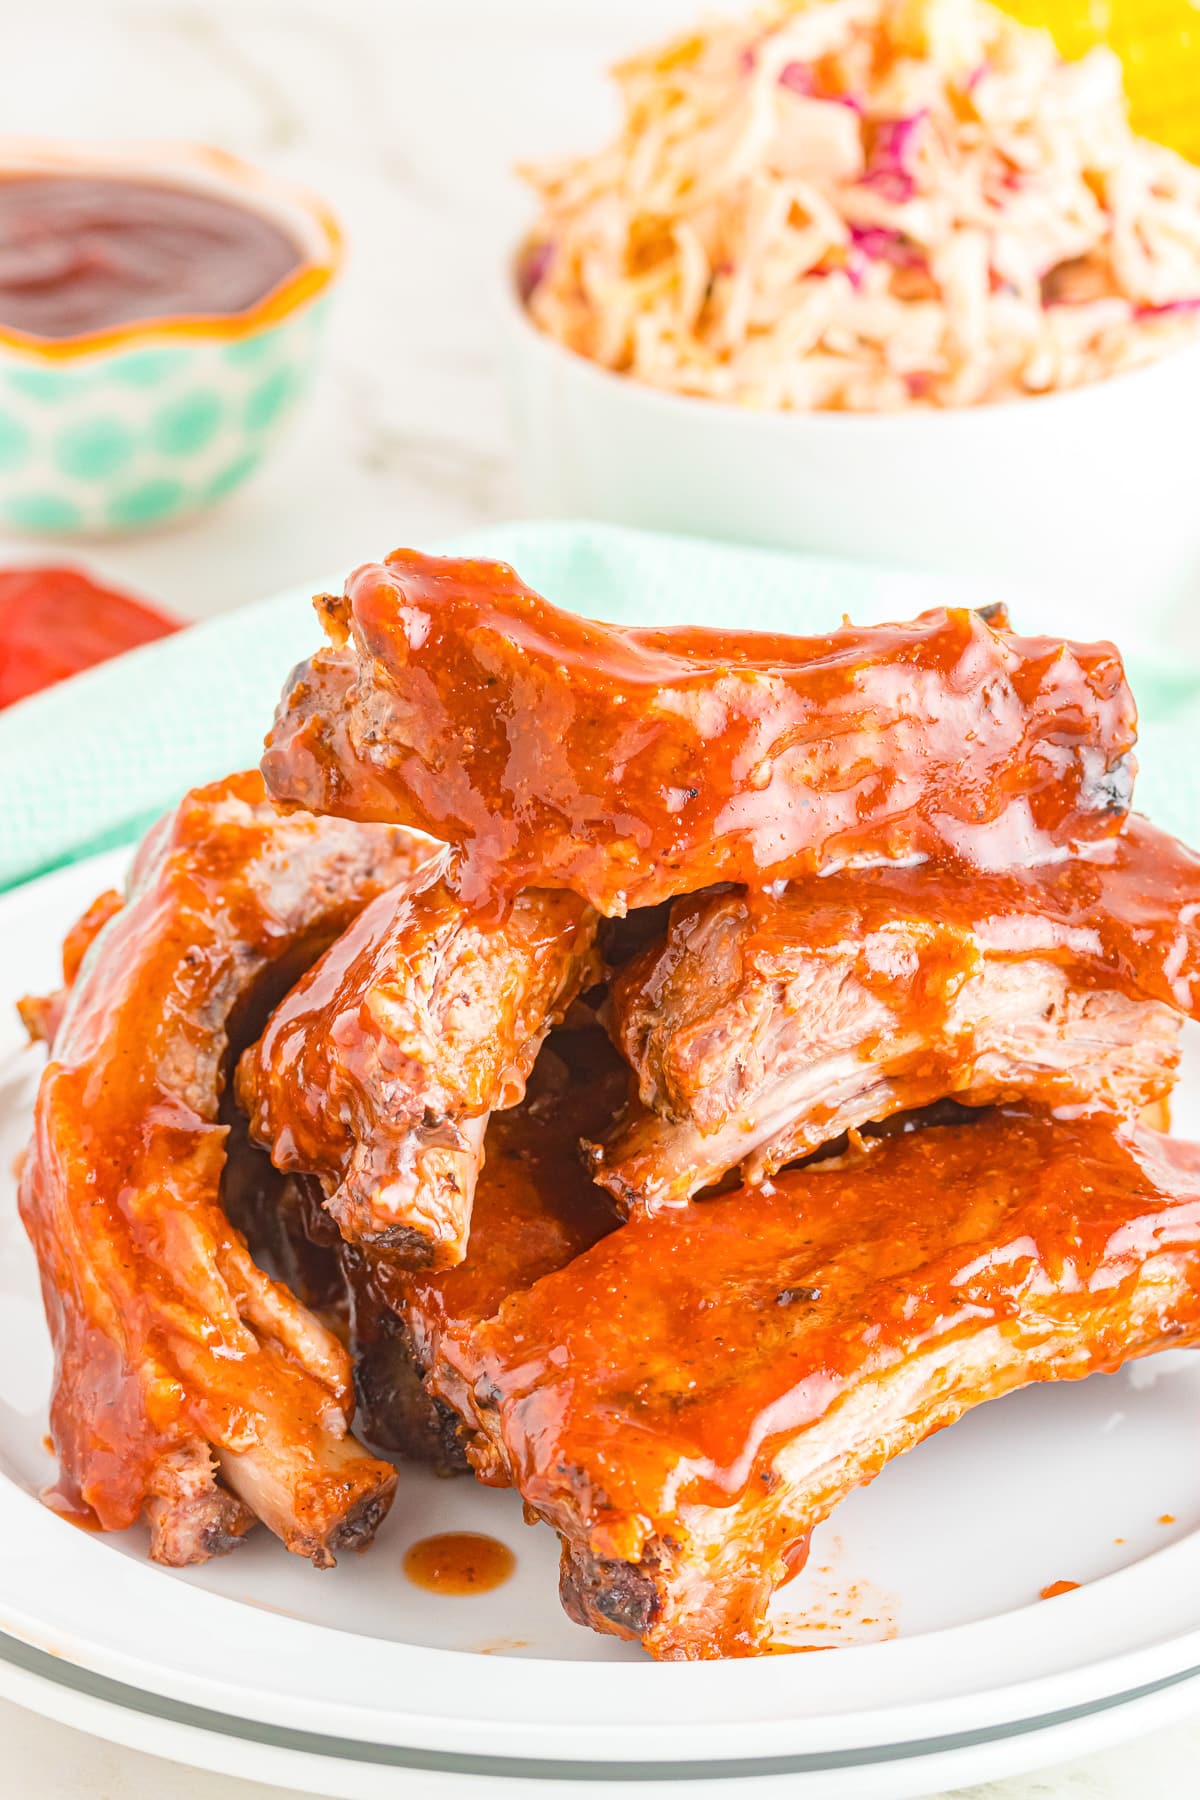 Saucy Dr. Pepper Ribs piled high on a plate from the side with side dishes in the background.